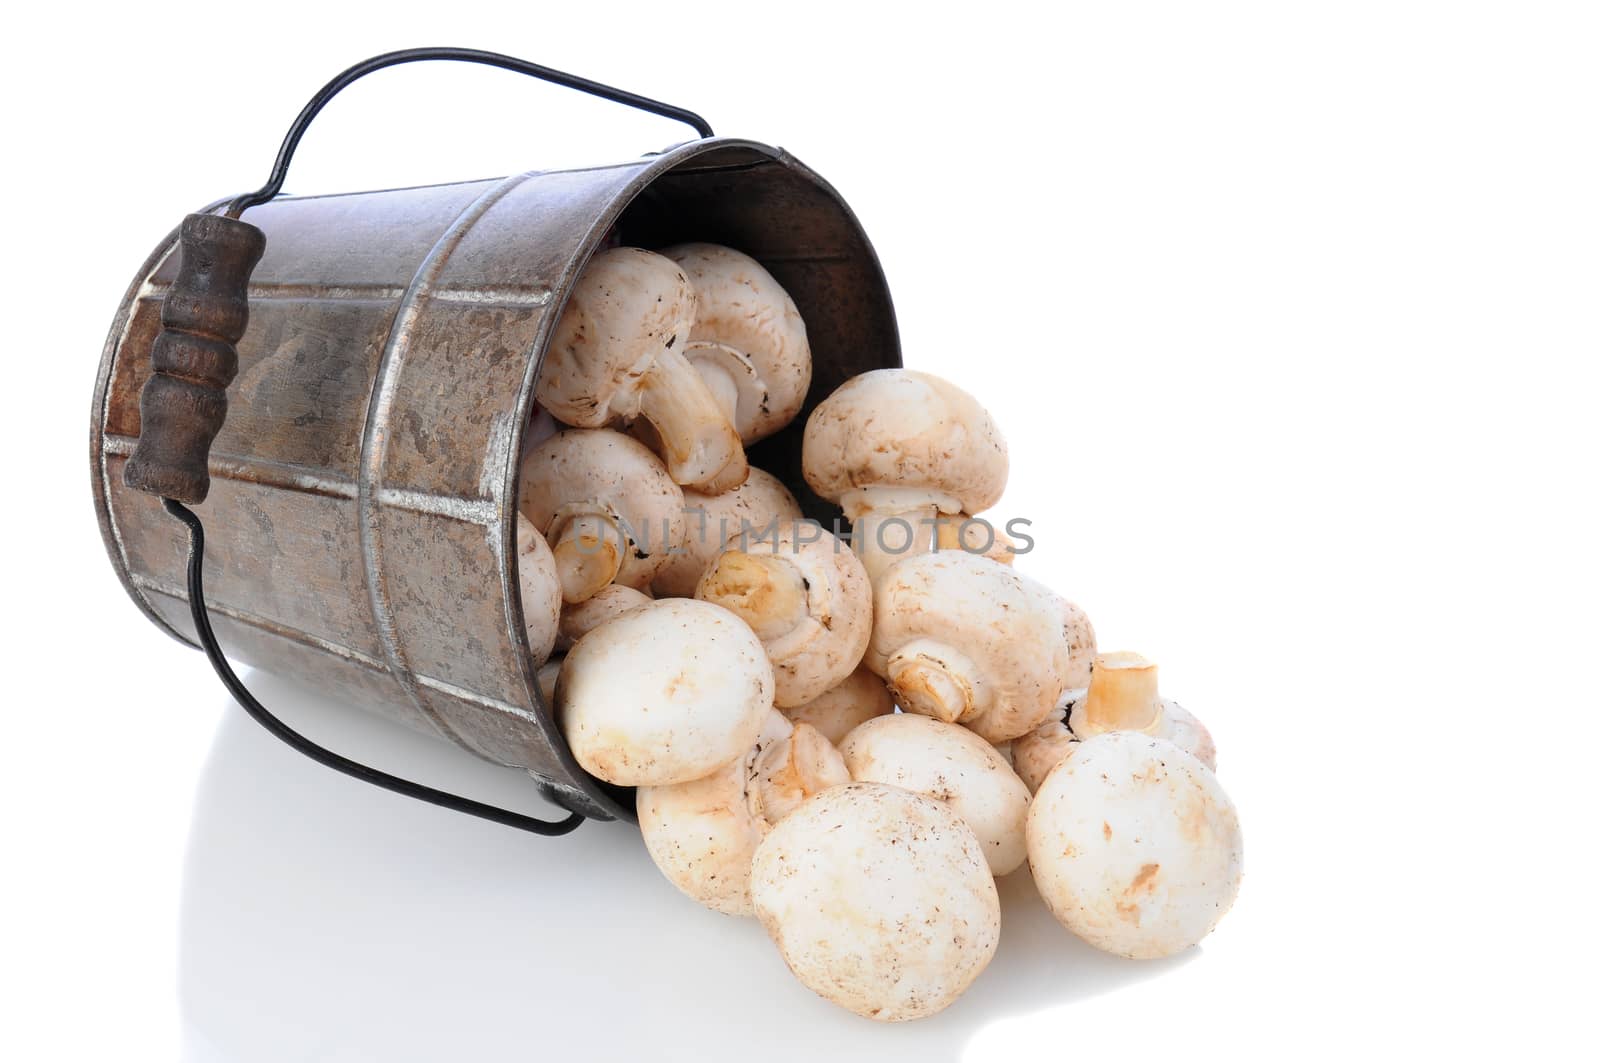 Fresh picked mushrooms spilling from a bucket laying on its side over a white background.